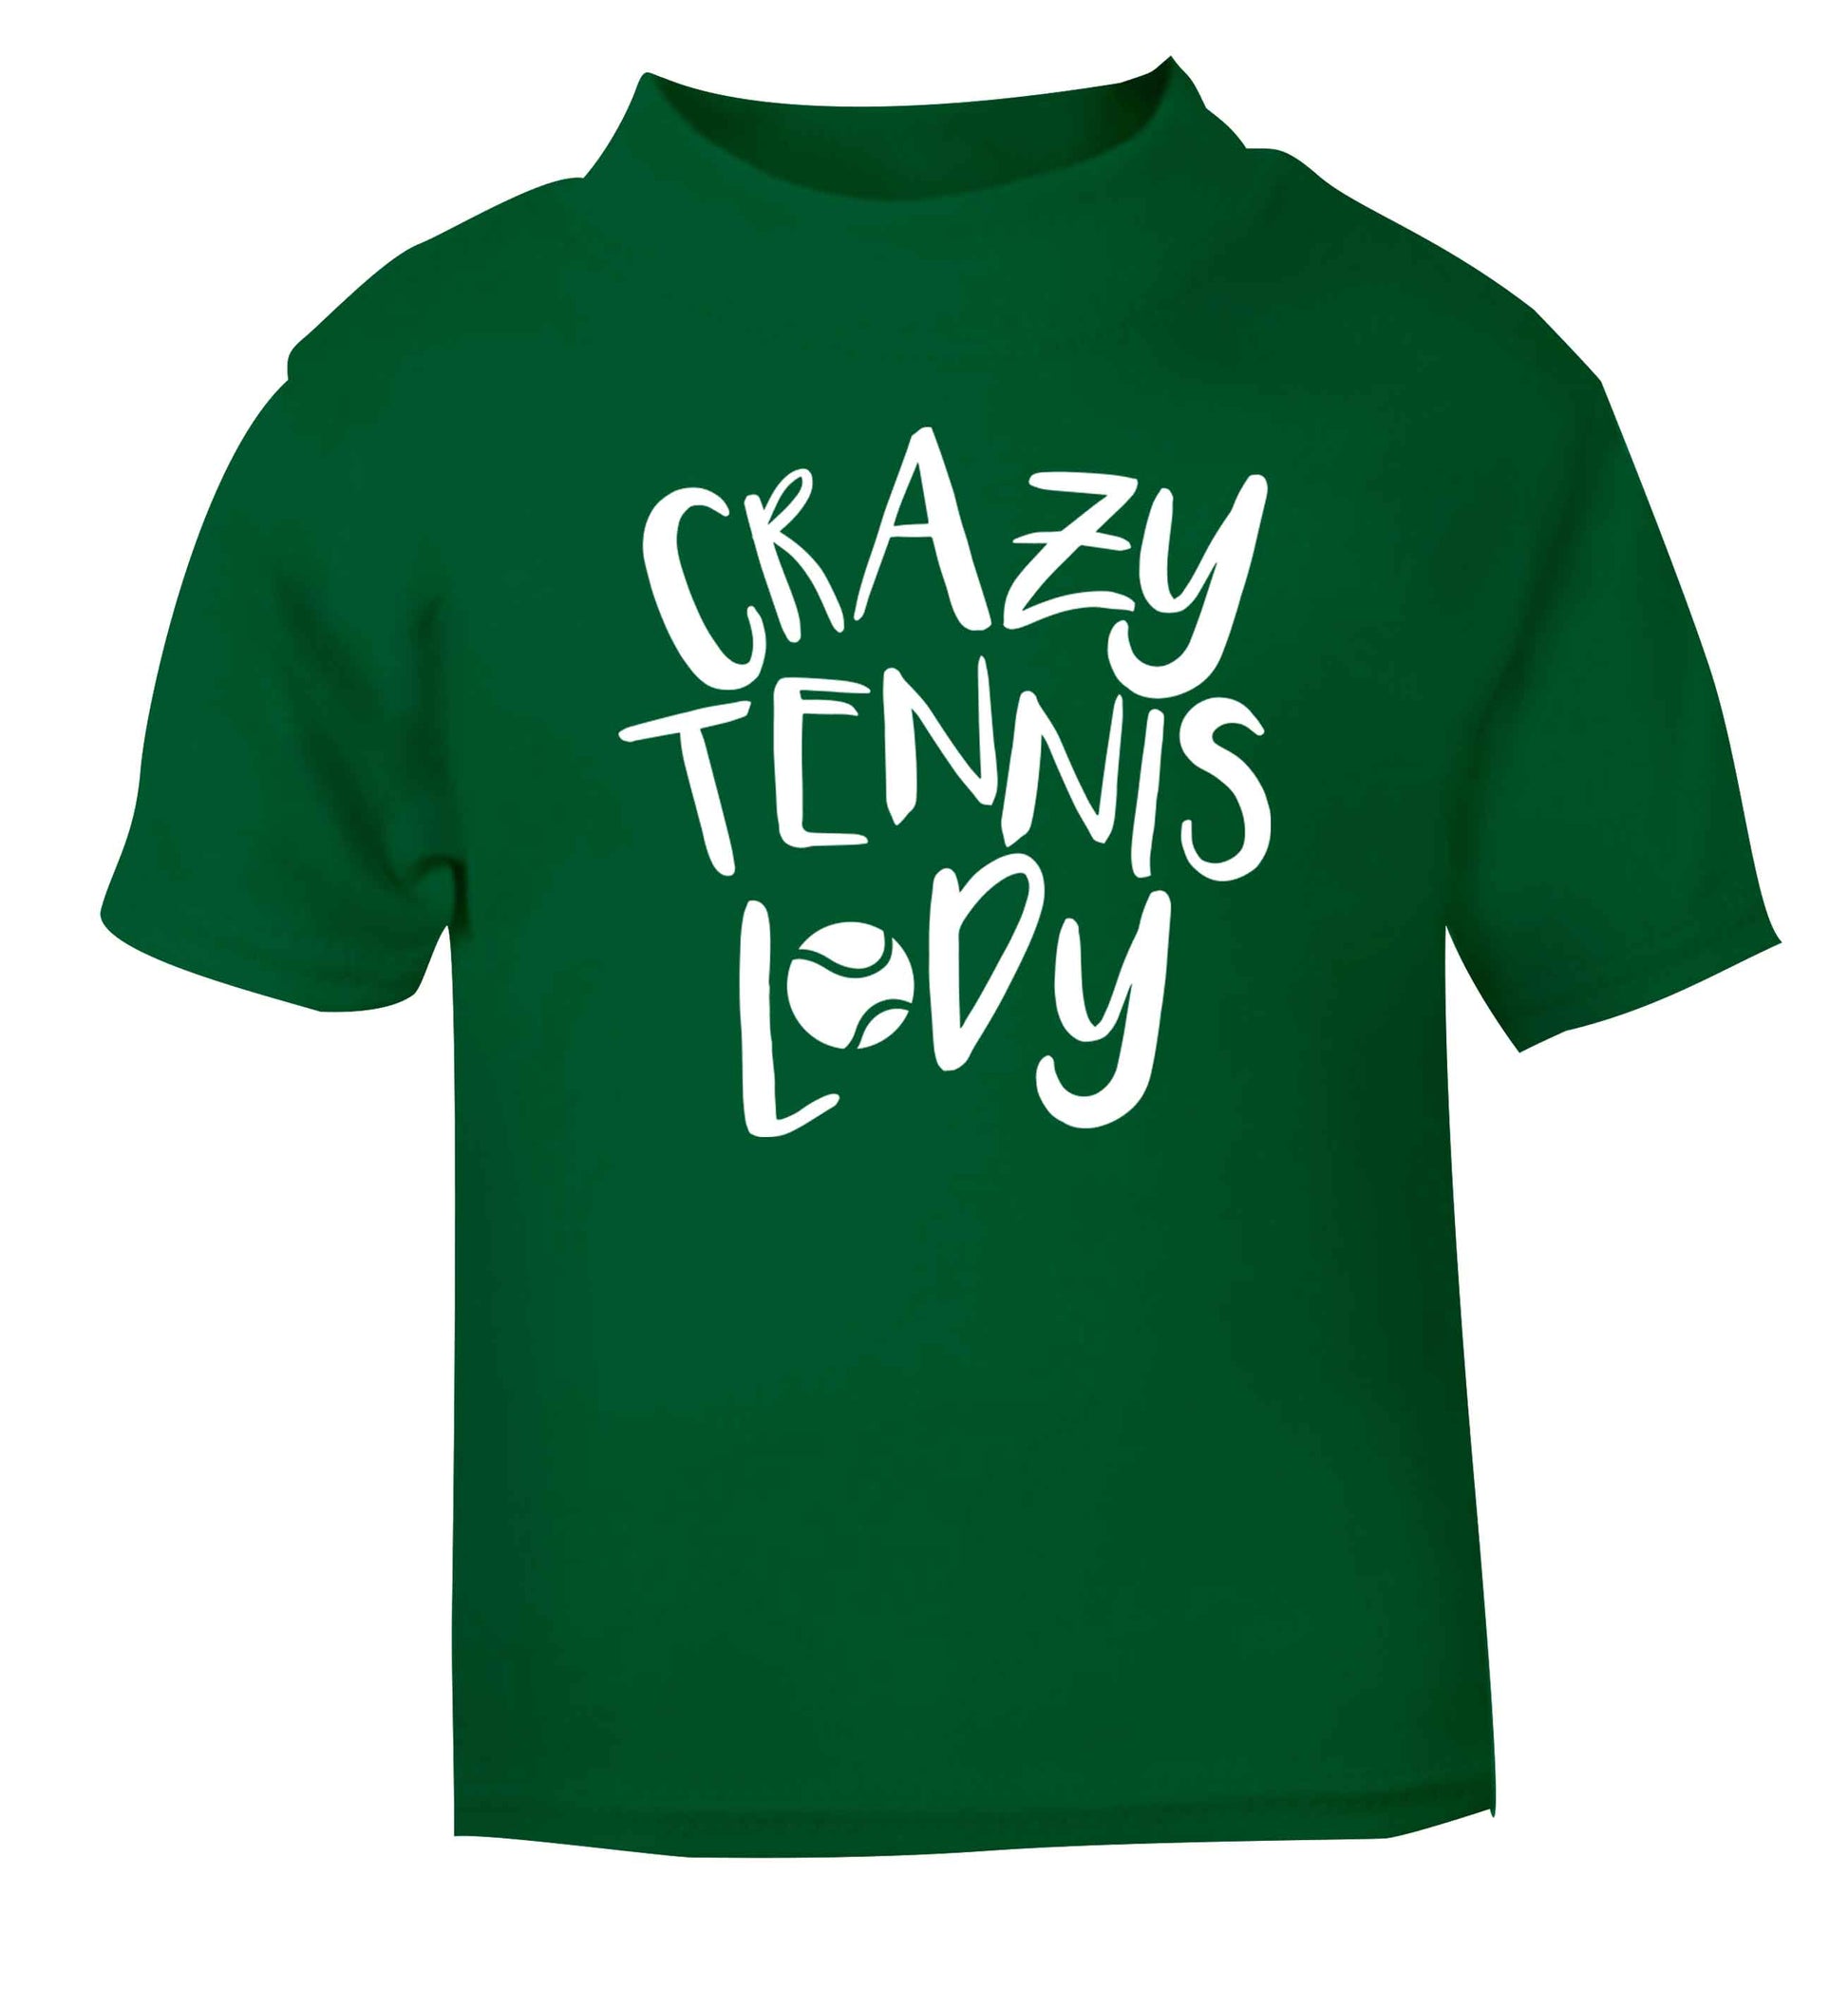 Crazy tennis lady green Baby Toddler Tshirt 2 Years